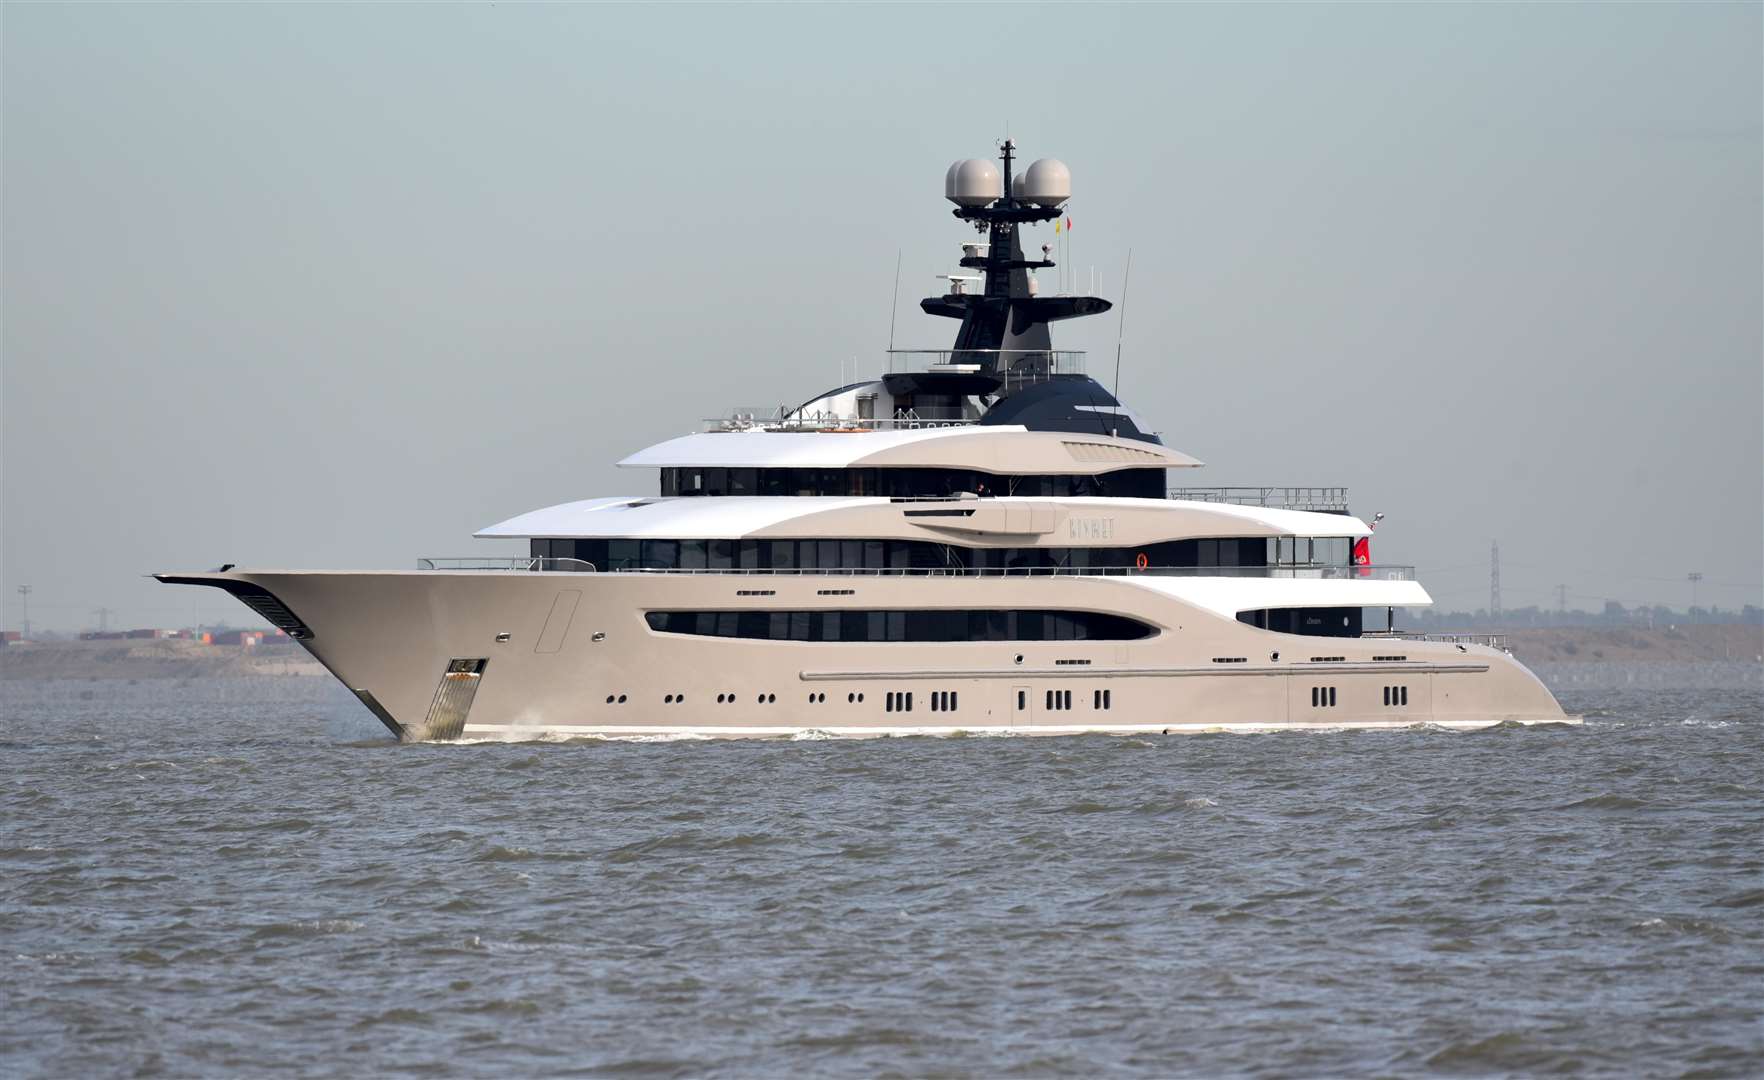 The super yacht Kimset on the River Thames passing Denton Wharf, Gravesend, picture Fraser Gray (4994171)